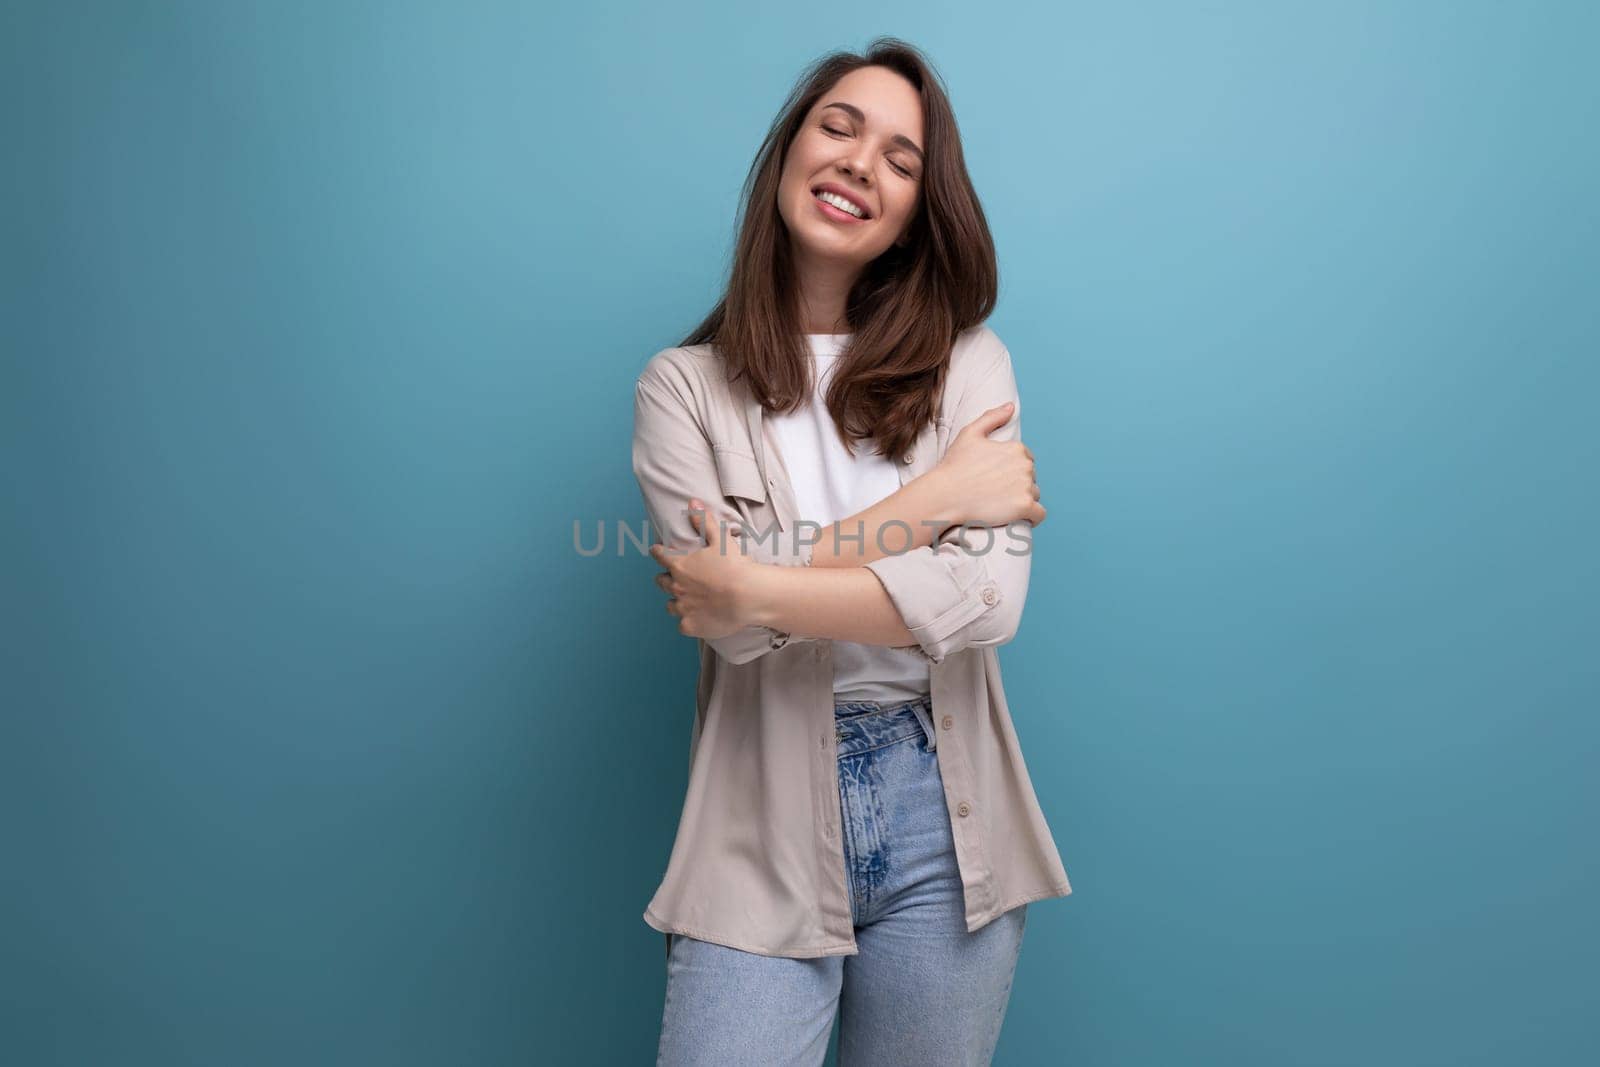 brunette young female adult in shirt and jeans smiling on background with copy space.